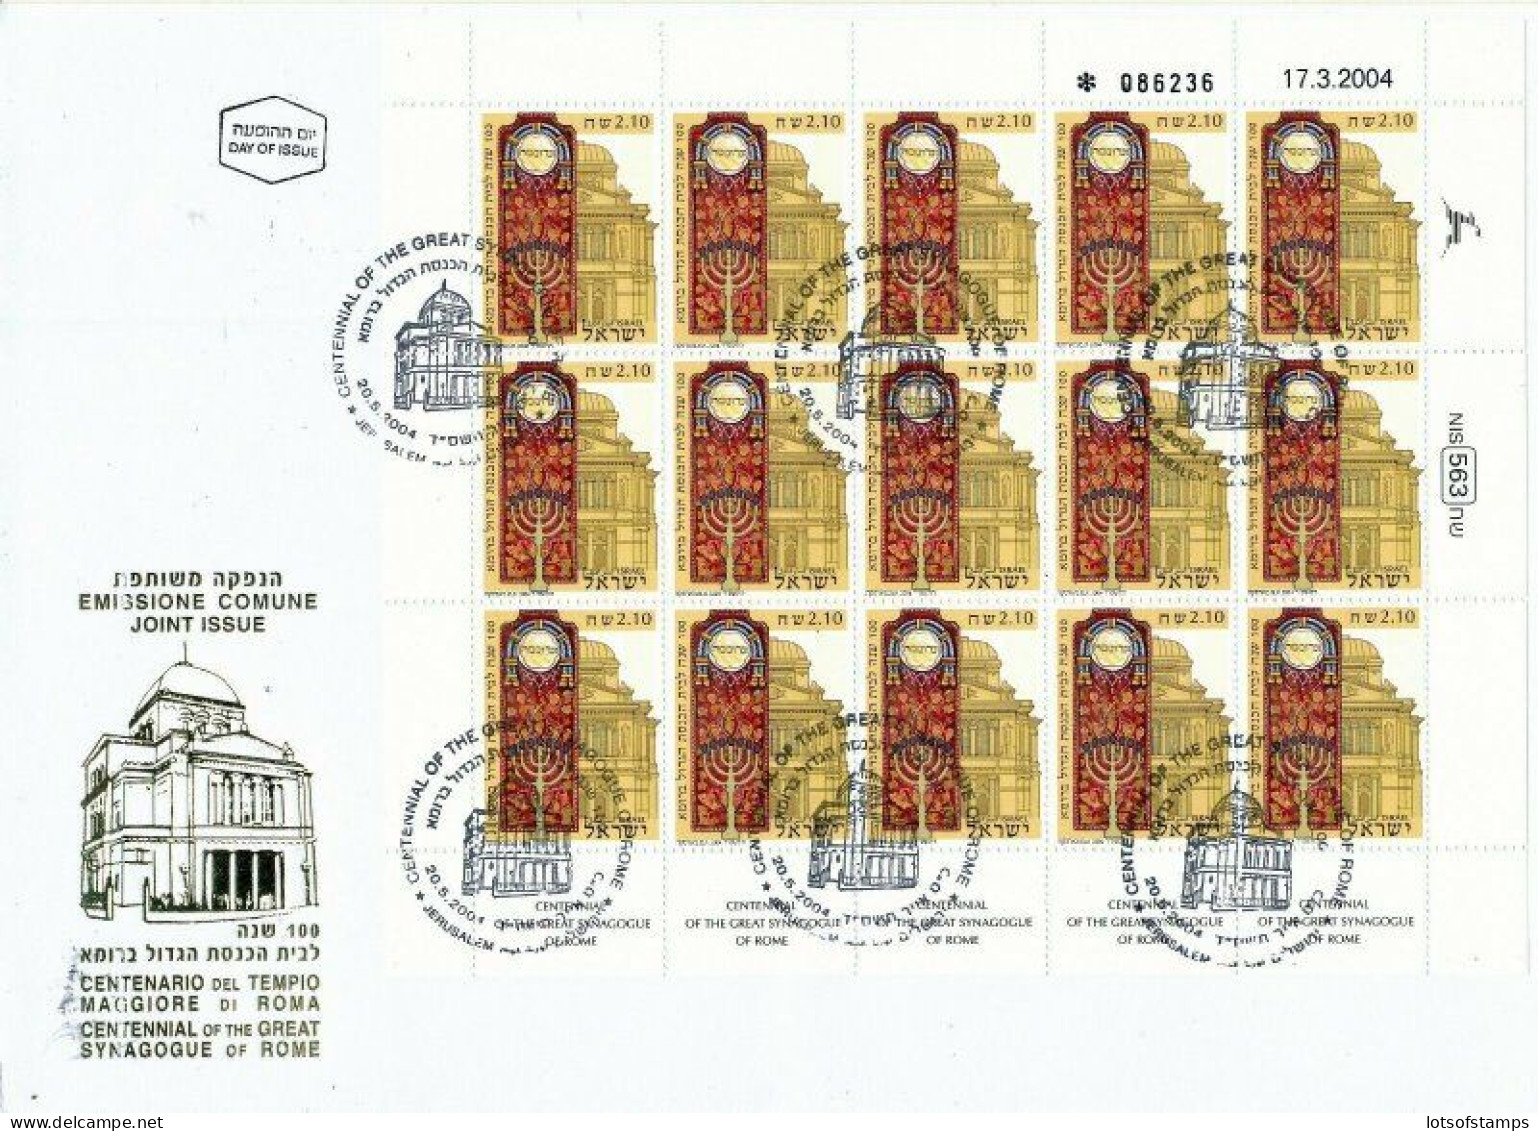 ISRAEL 2004 JOINT ISSUE WITH ITALY ROME SYNAGOGUE SHEET FDC's SEE 2 SCAN - Cartas & Documentos